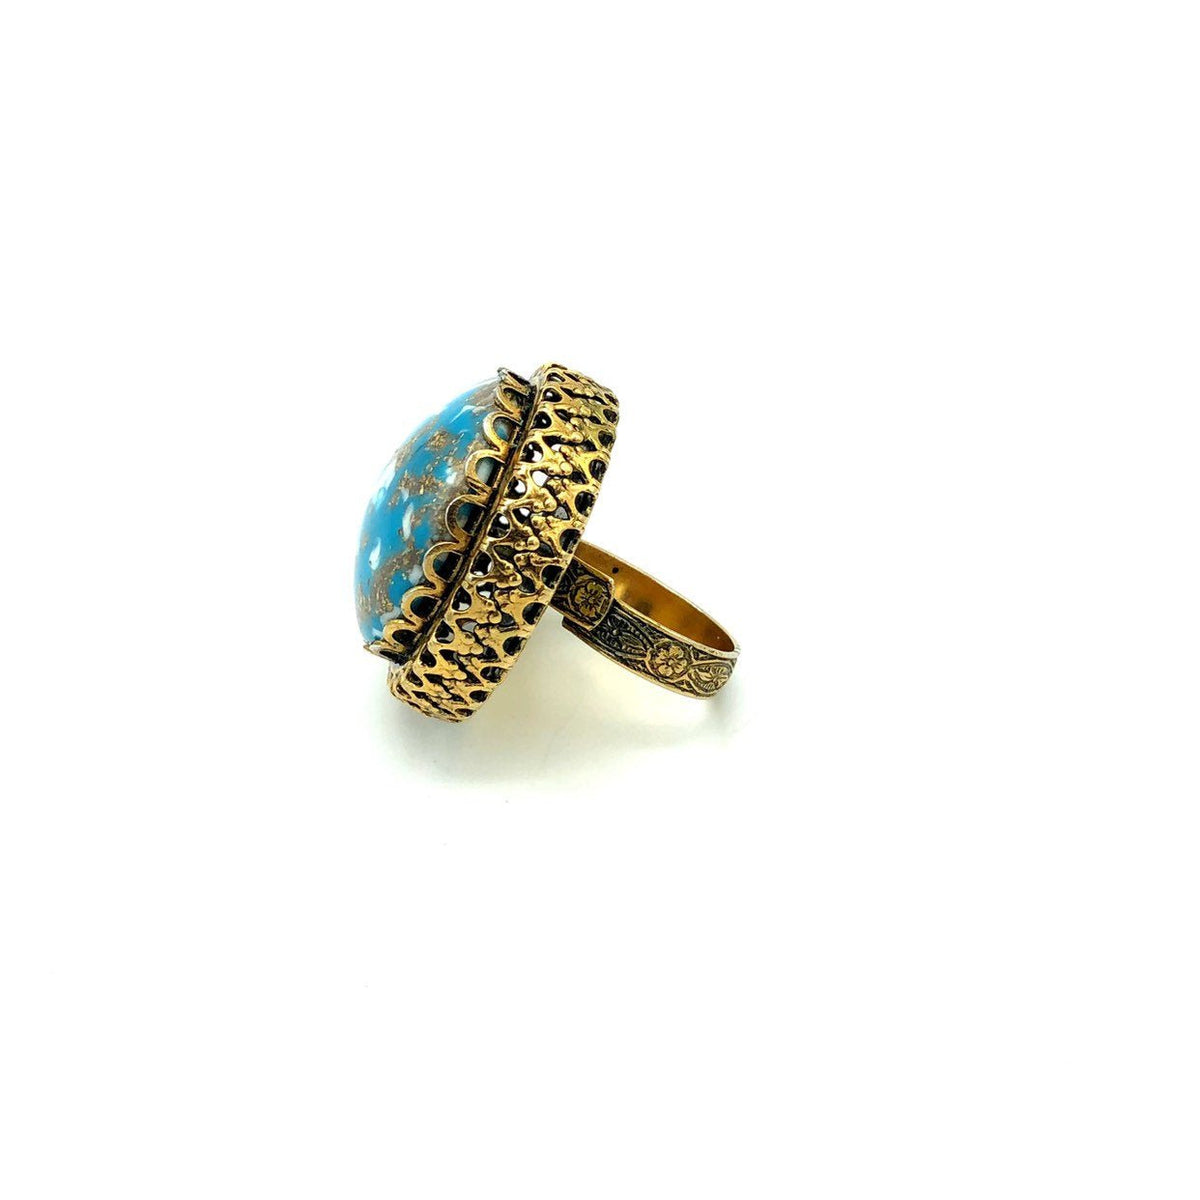 Vintage Large Faux Turquoise Cabochon Cocktail Ring - 24 Wishes Vintage Jewelry